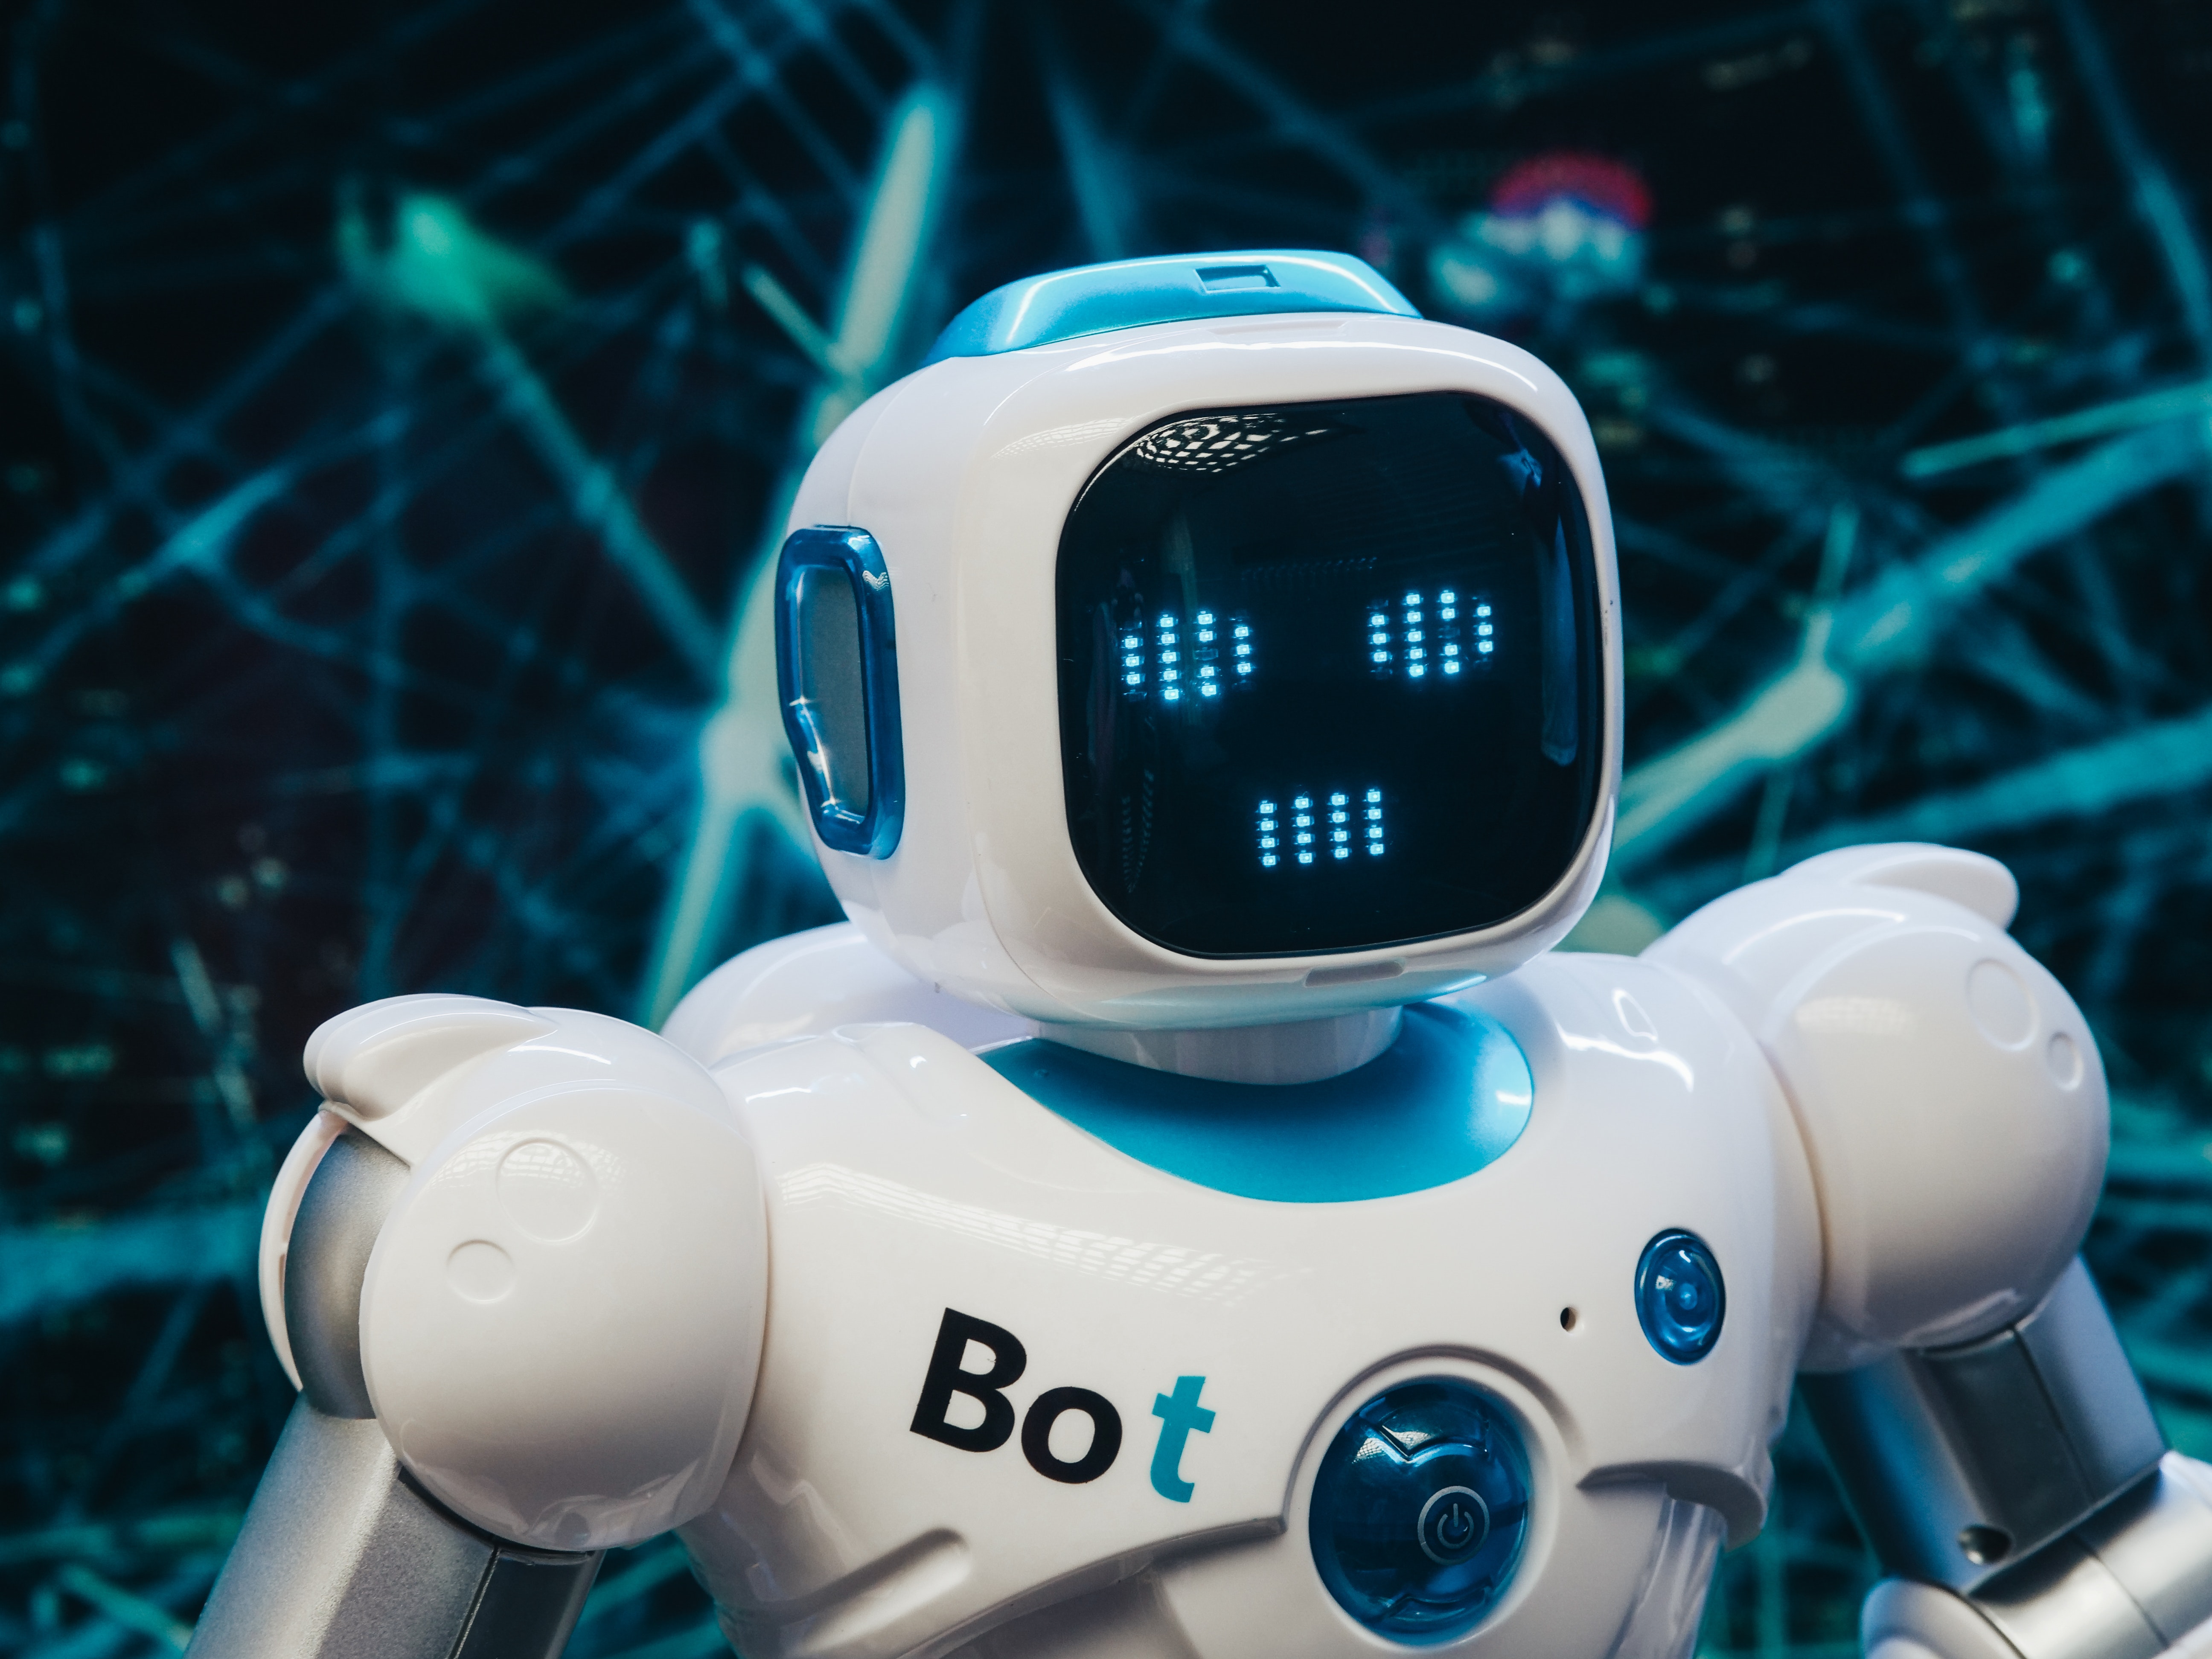 10 Best Bots Available On The Internet Right Now